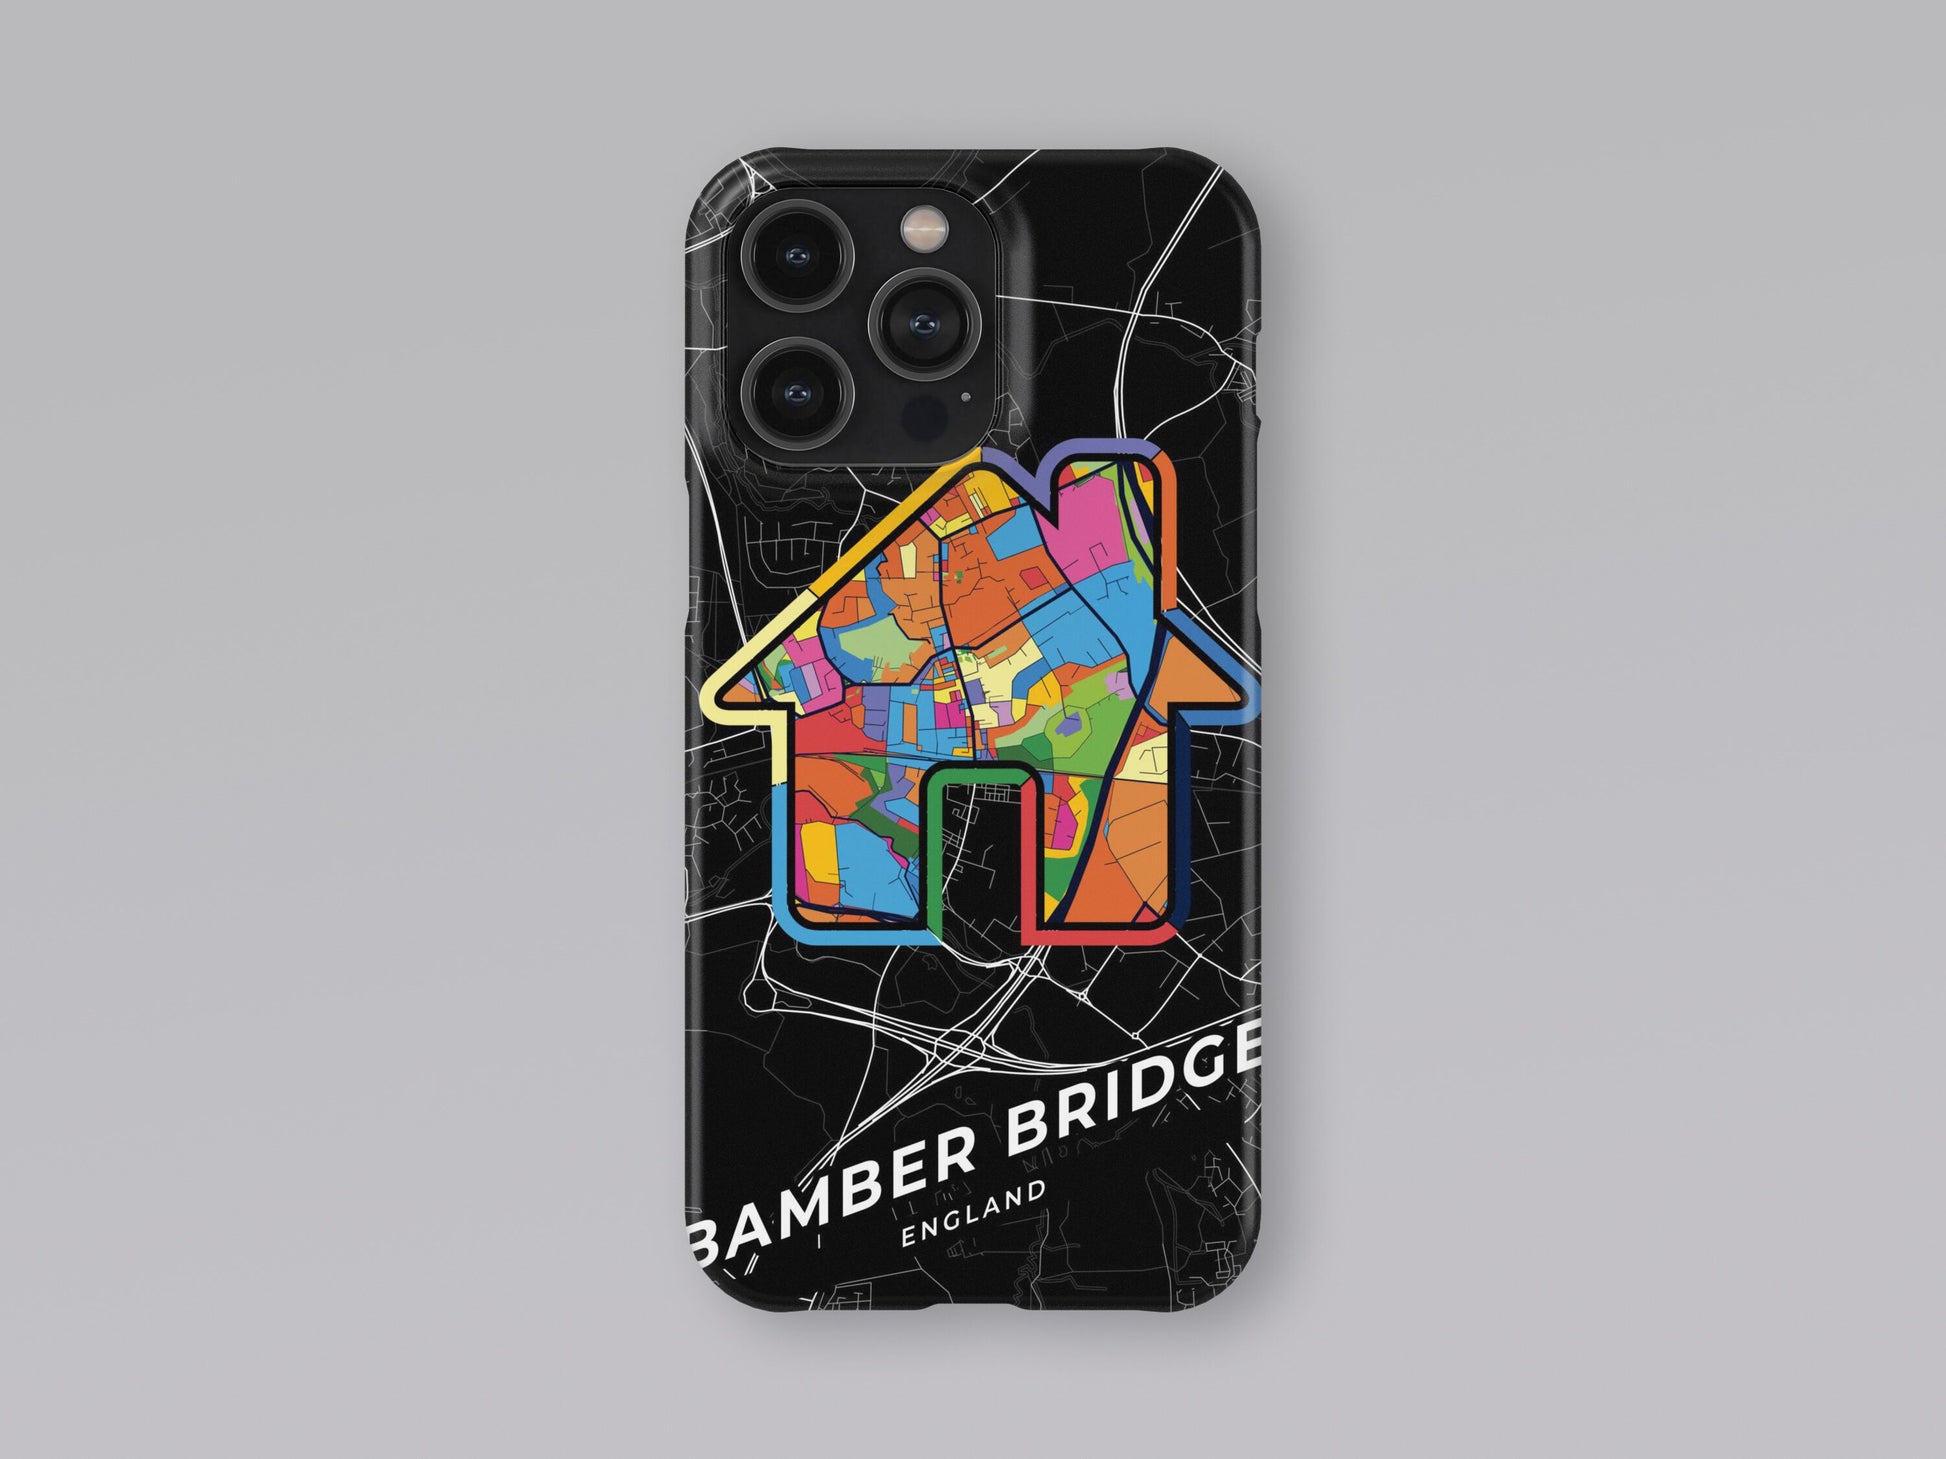 Bamber Bridge England slim phone case with colorful icon. Birthday, wedding or housewarming gift. Couple match cases. 3